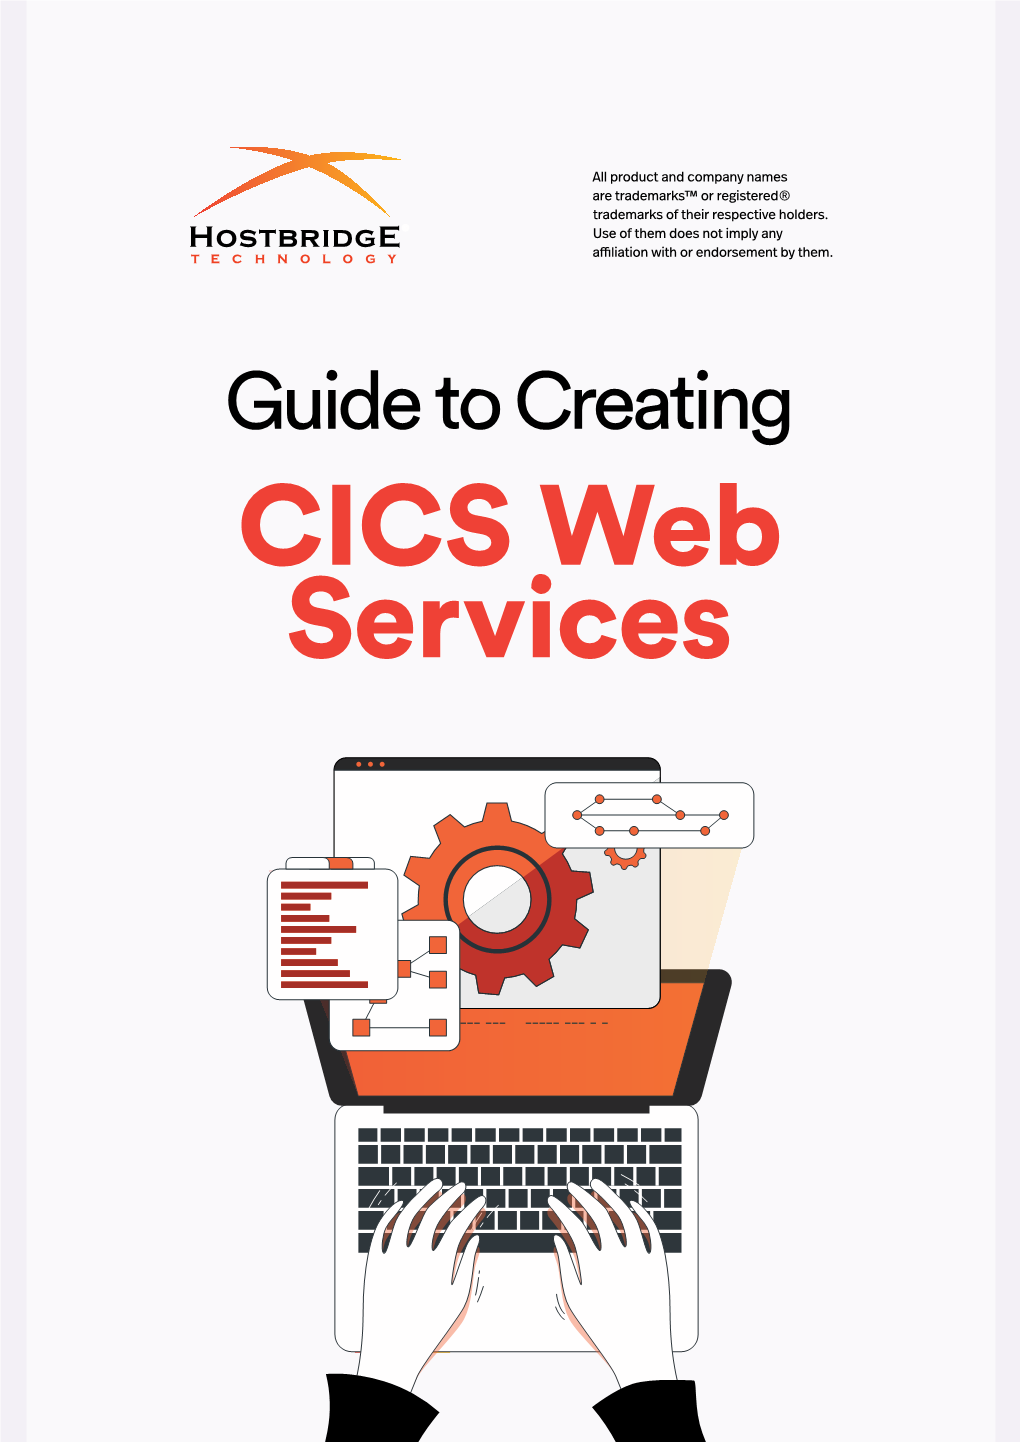 CICS Web Services CICS Applications Continue to Provide the Foundation for Many Critical Business Processes in the Enterprise